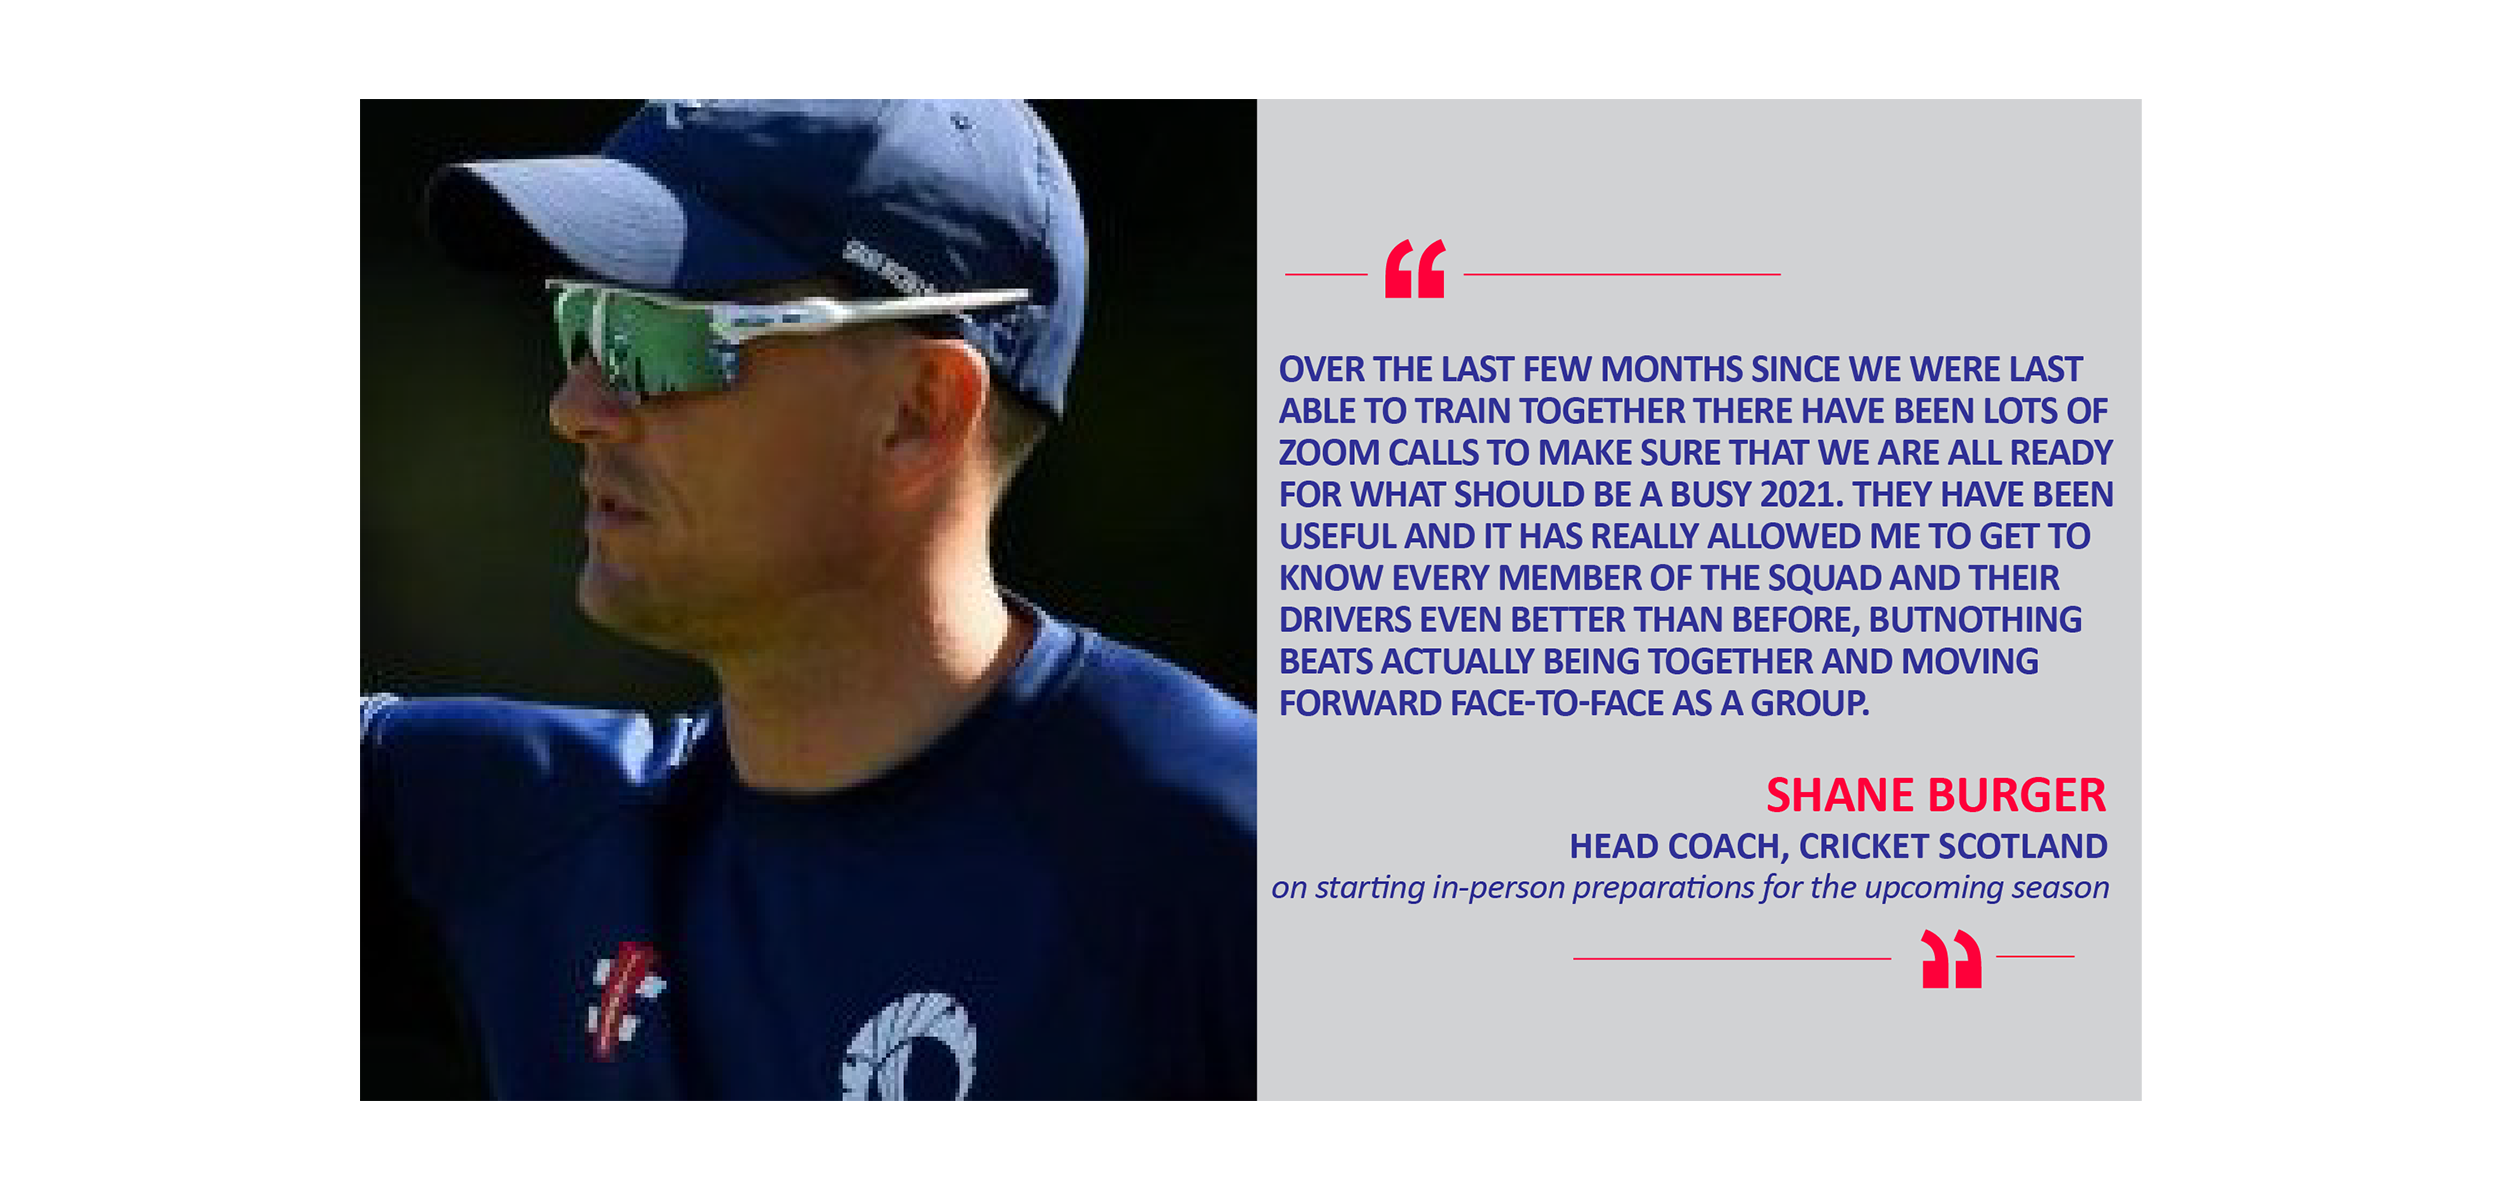 Shane Burger, Head Coach, Cricket Scotland on starting in-person preparations for the upcoming season